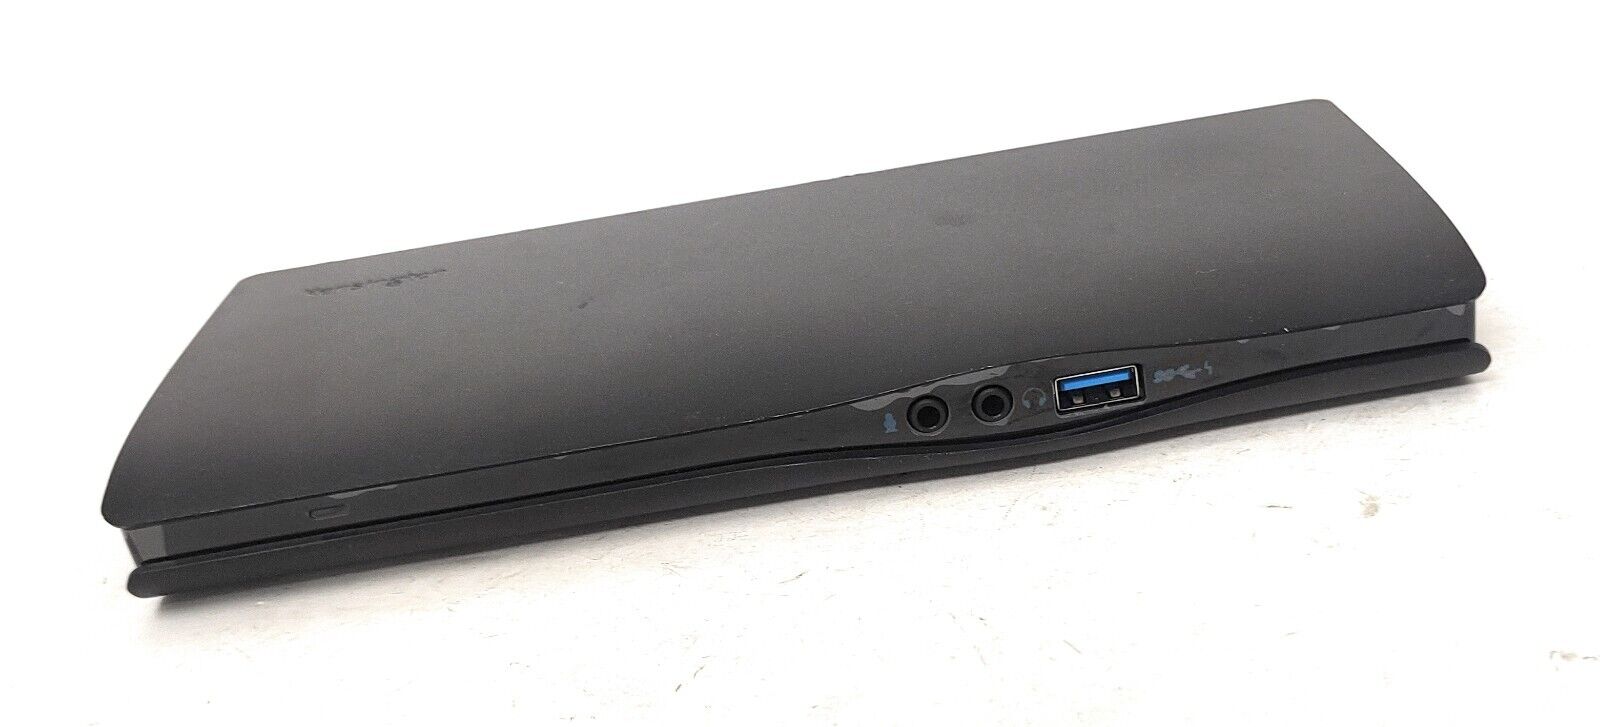 Kensington SD4600P USB-C Dock With Power Delivery